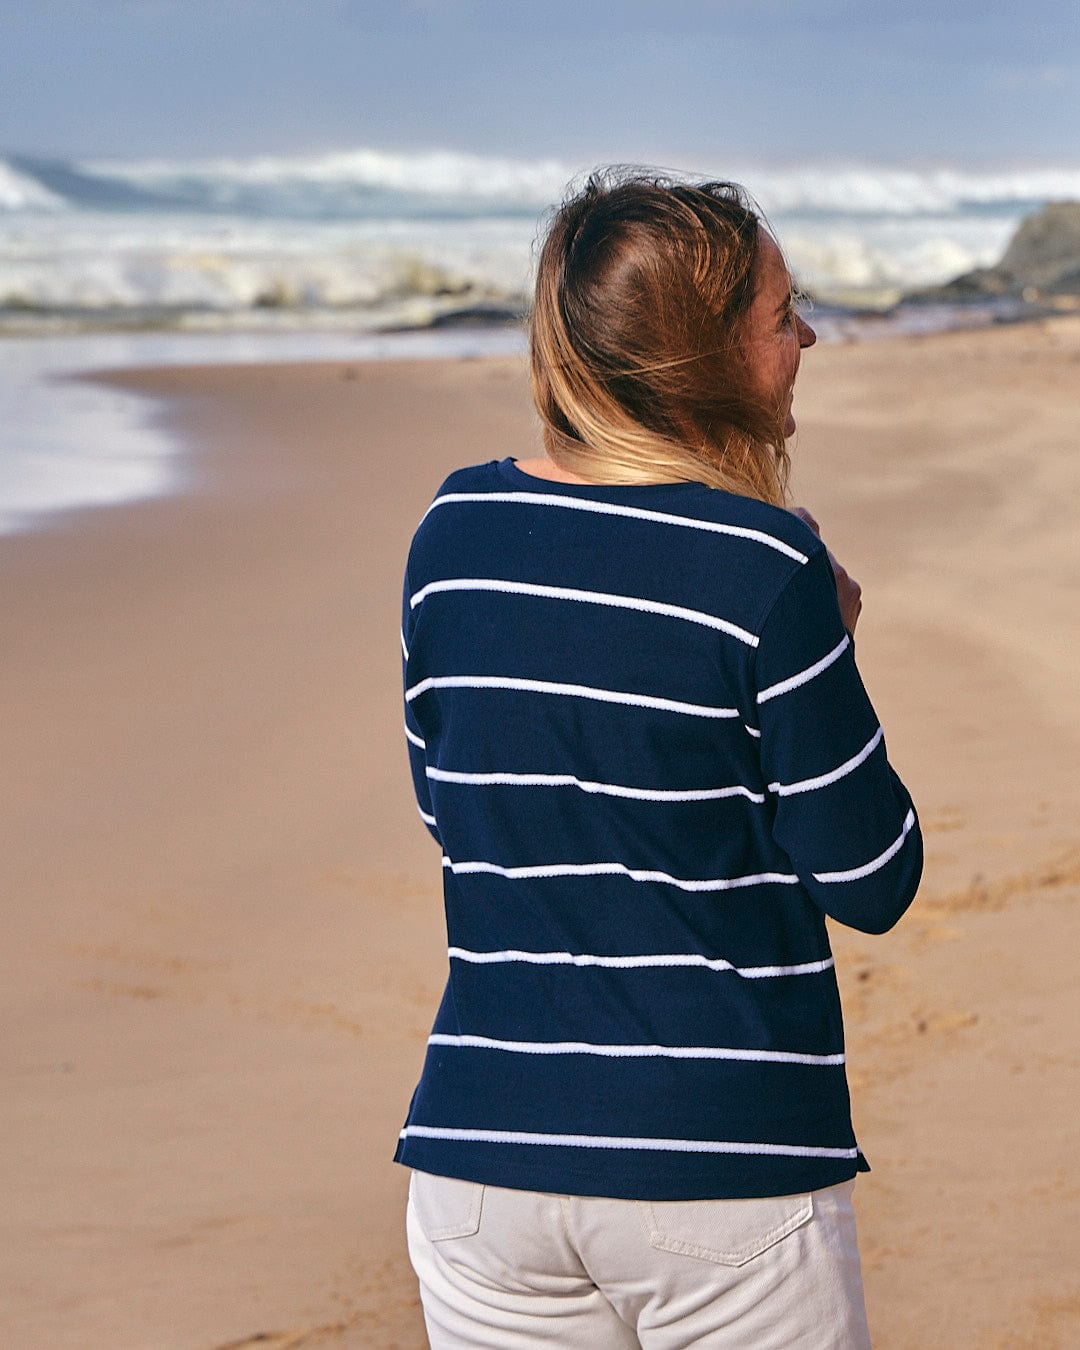 A woman standing on a beach looking at the ocean wearing the Saltrock Hartland - Womens Striped Long Sleeve Tee - Blue.